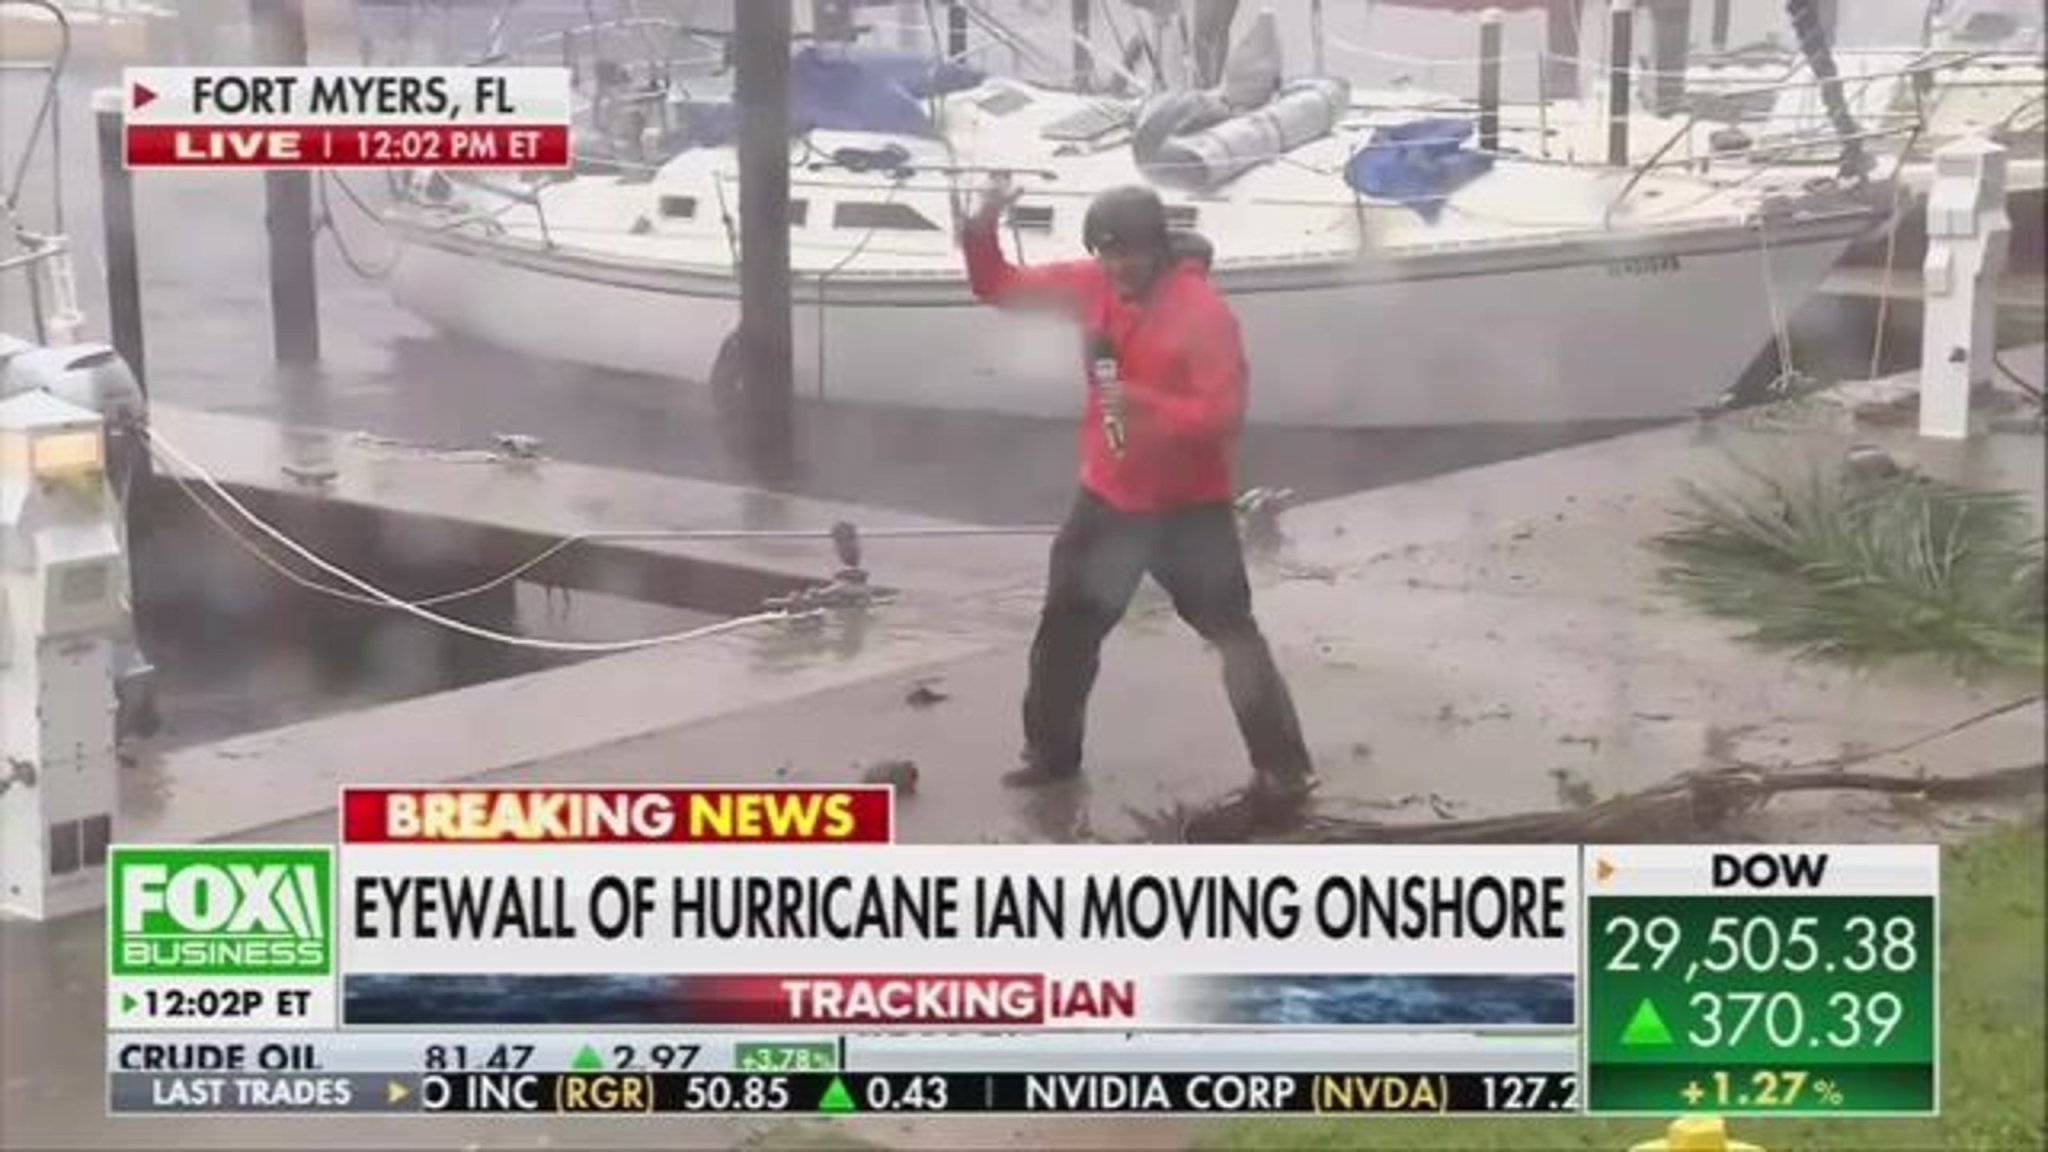 Watch FOX Weather reporter Robert Ray thrown into the field as Hurricane Ian makes landfall in Fort Myers, Florida.